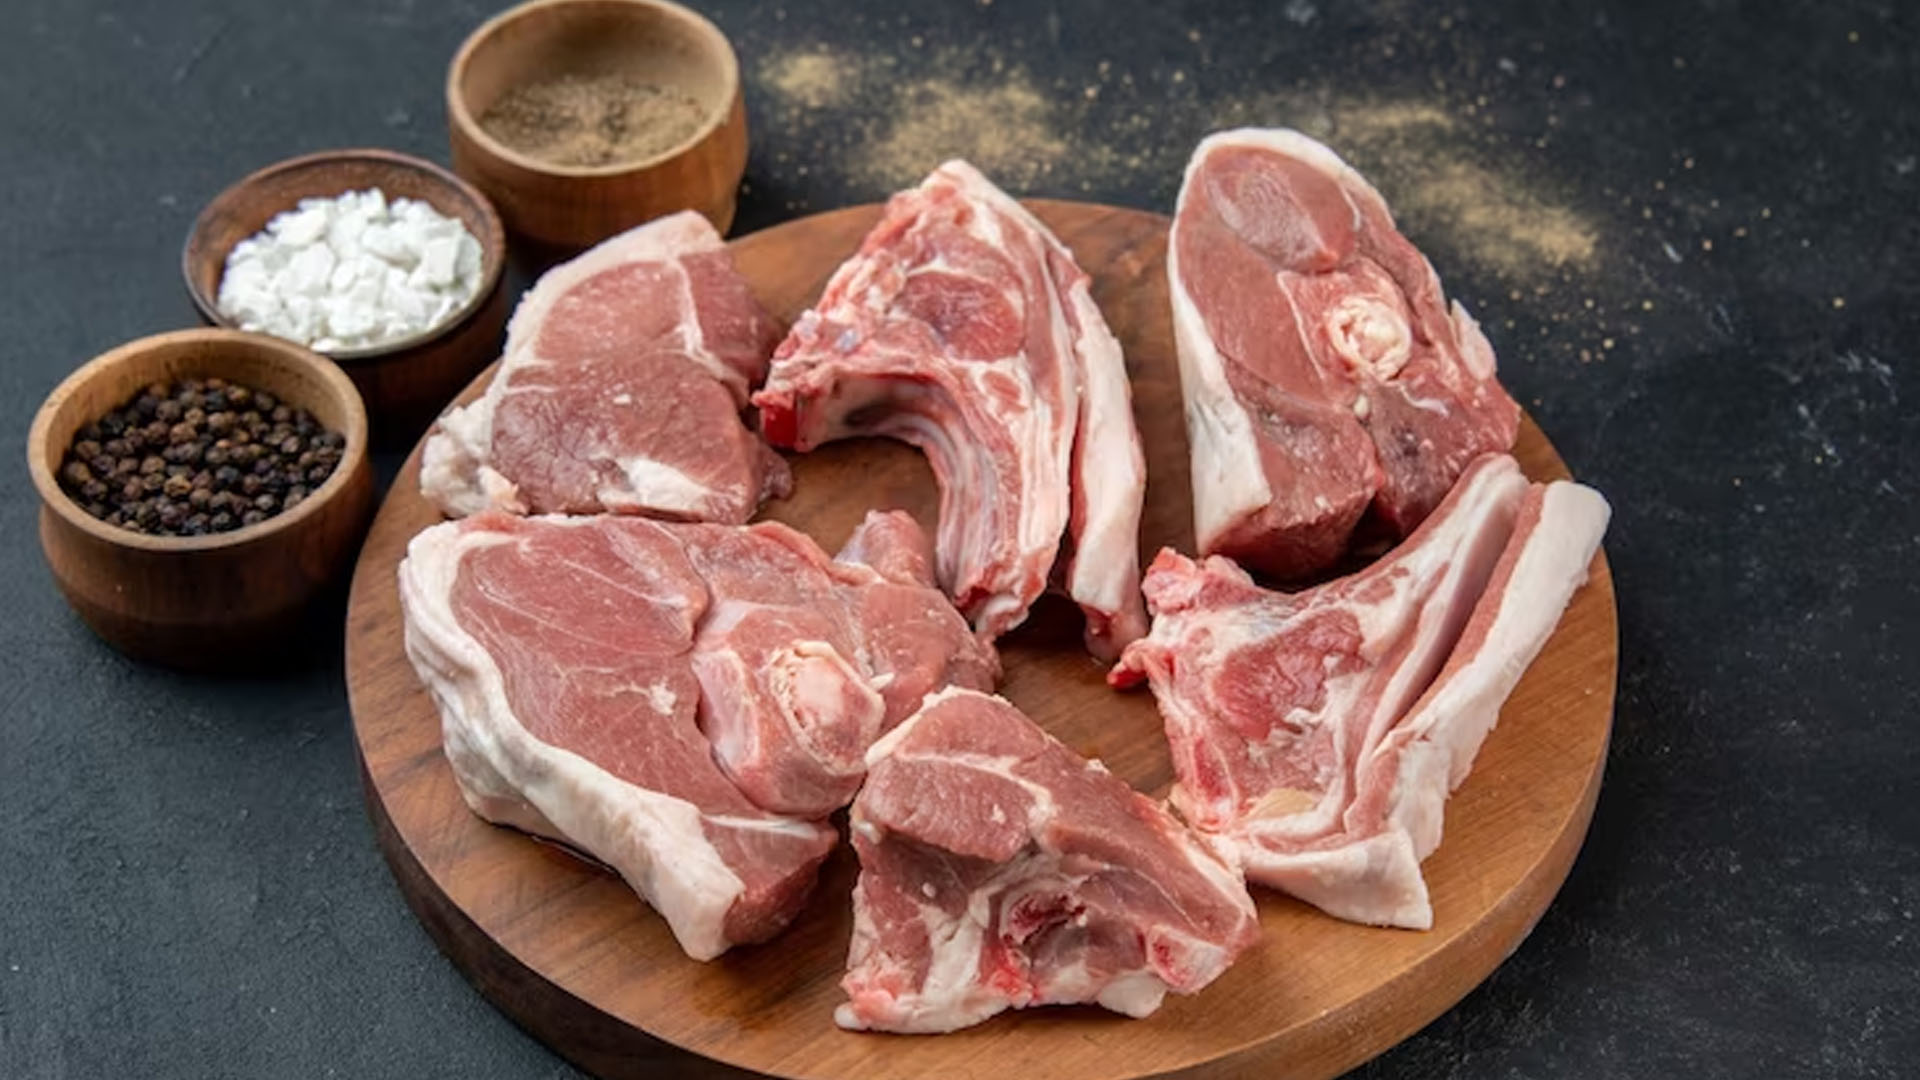 What Are The Health Benefit of Pig Mutton?